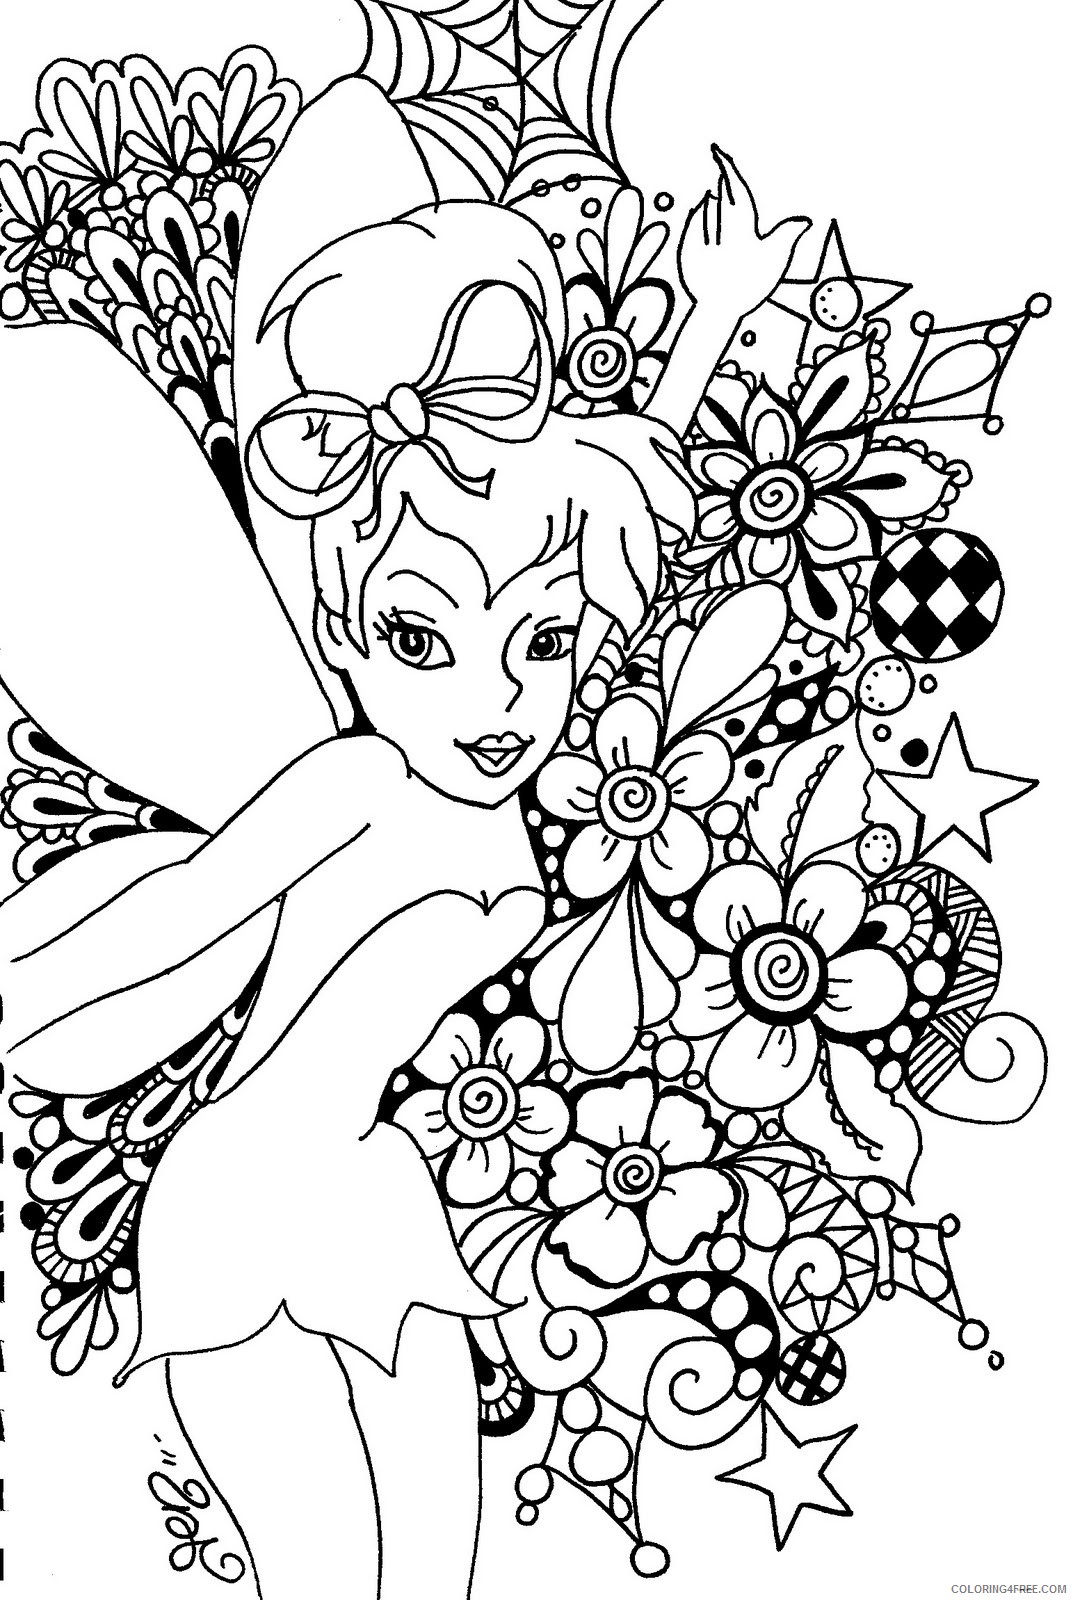 Tinker Bell Coloring Pages Cartoons Tinkerbell to Print for Free Printable 2020 6681 Coloring4free